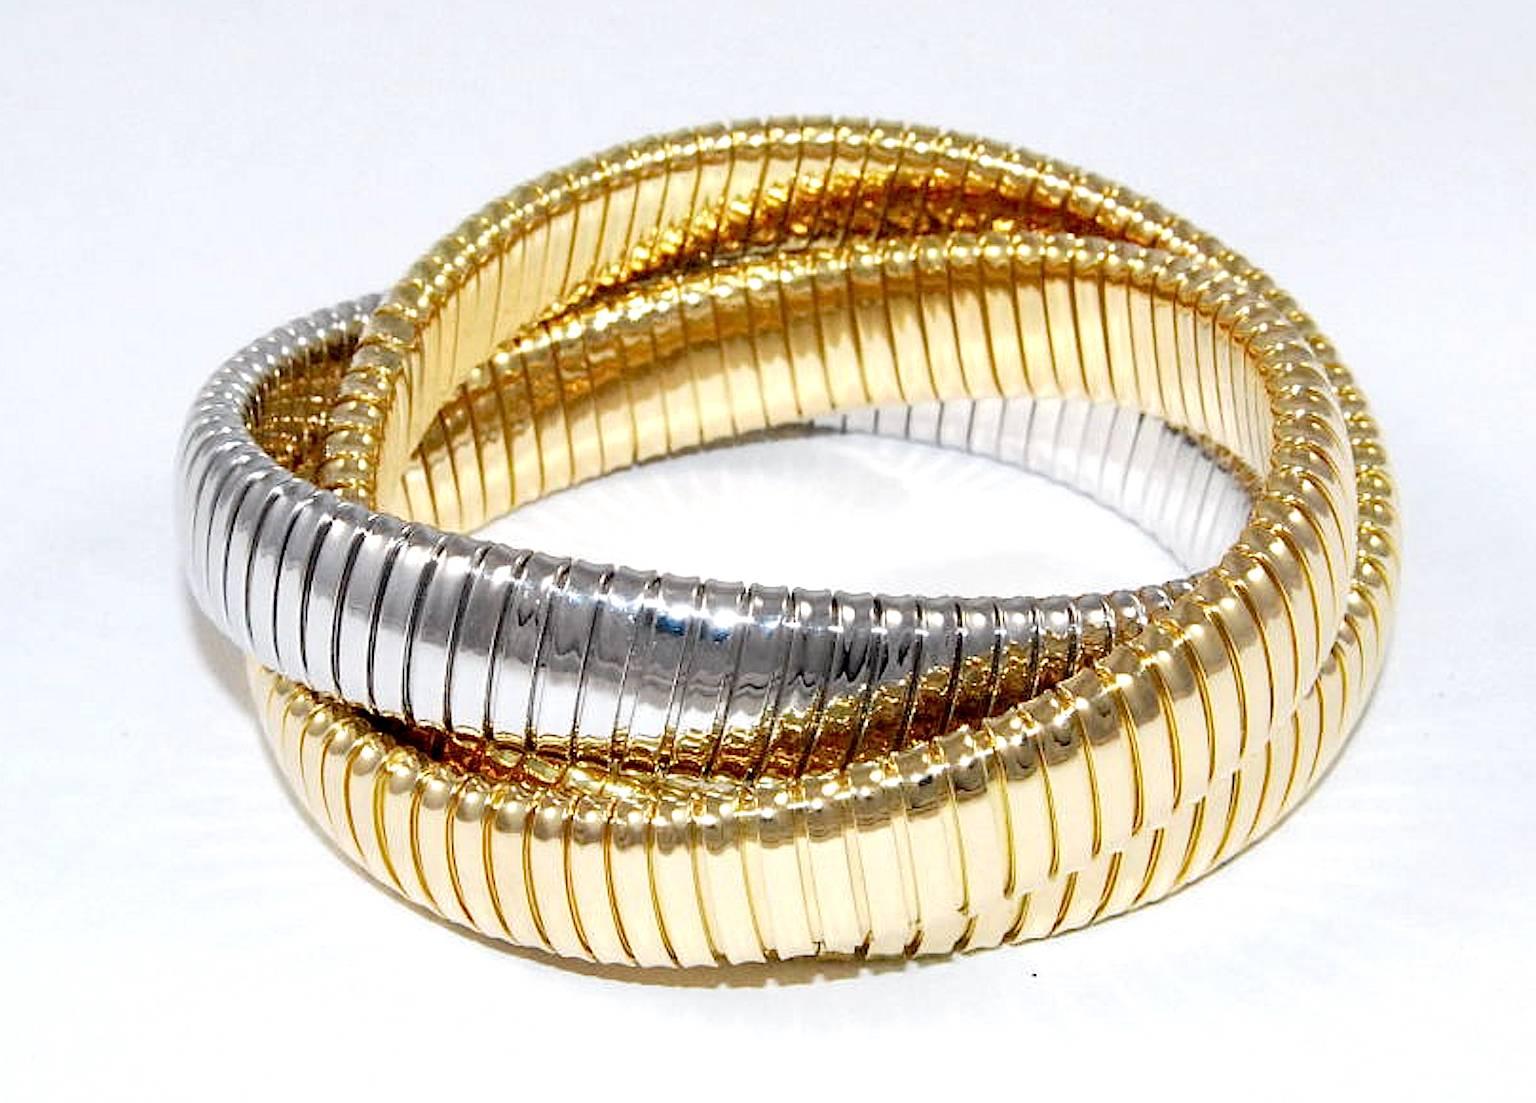 Carlo Weingrill original rolling bracelet in 12mm width. It was 1989 when Carlo Weingrill started to produce this iconic bracelet. It is three 12mm tubogas strands intertwined where you can combine colors and size.
18carat gold